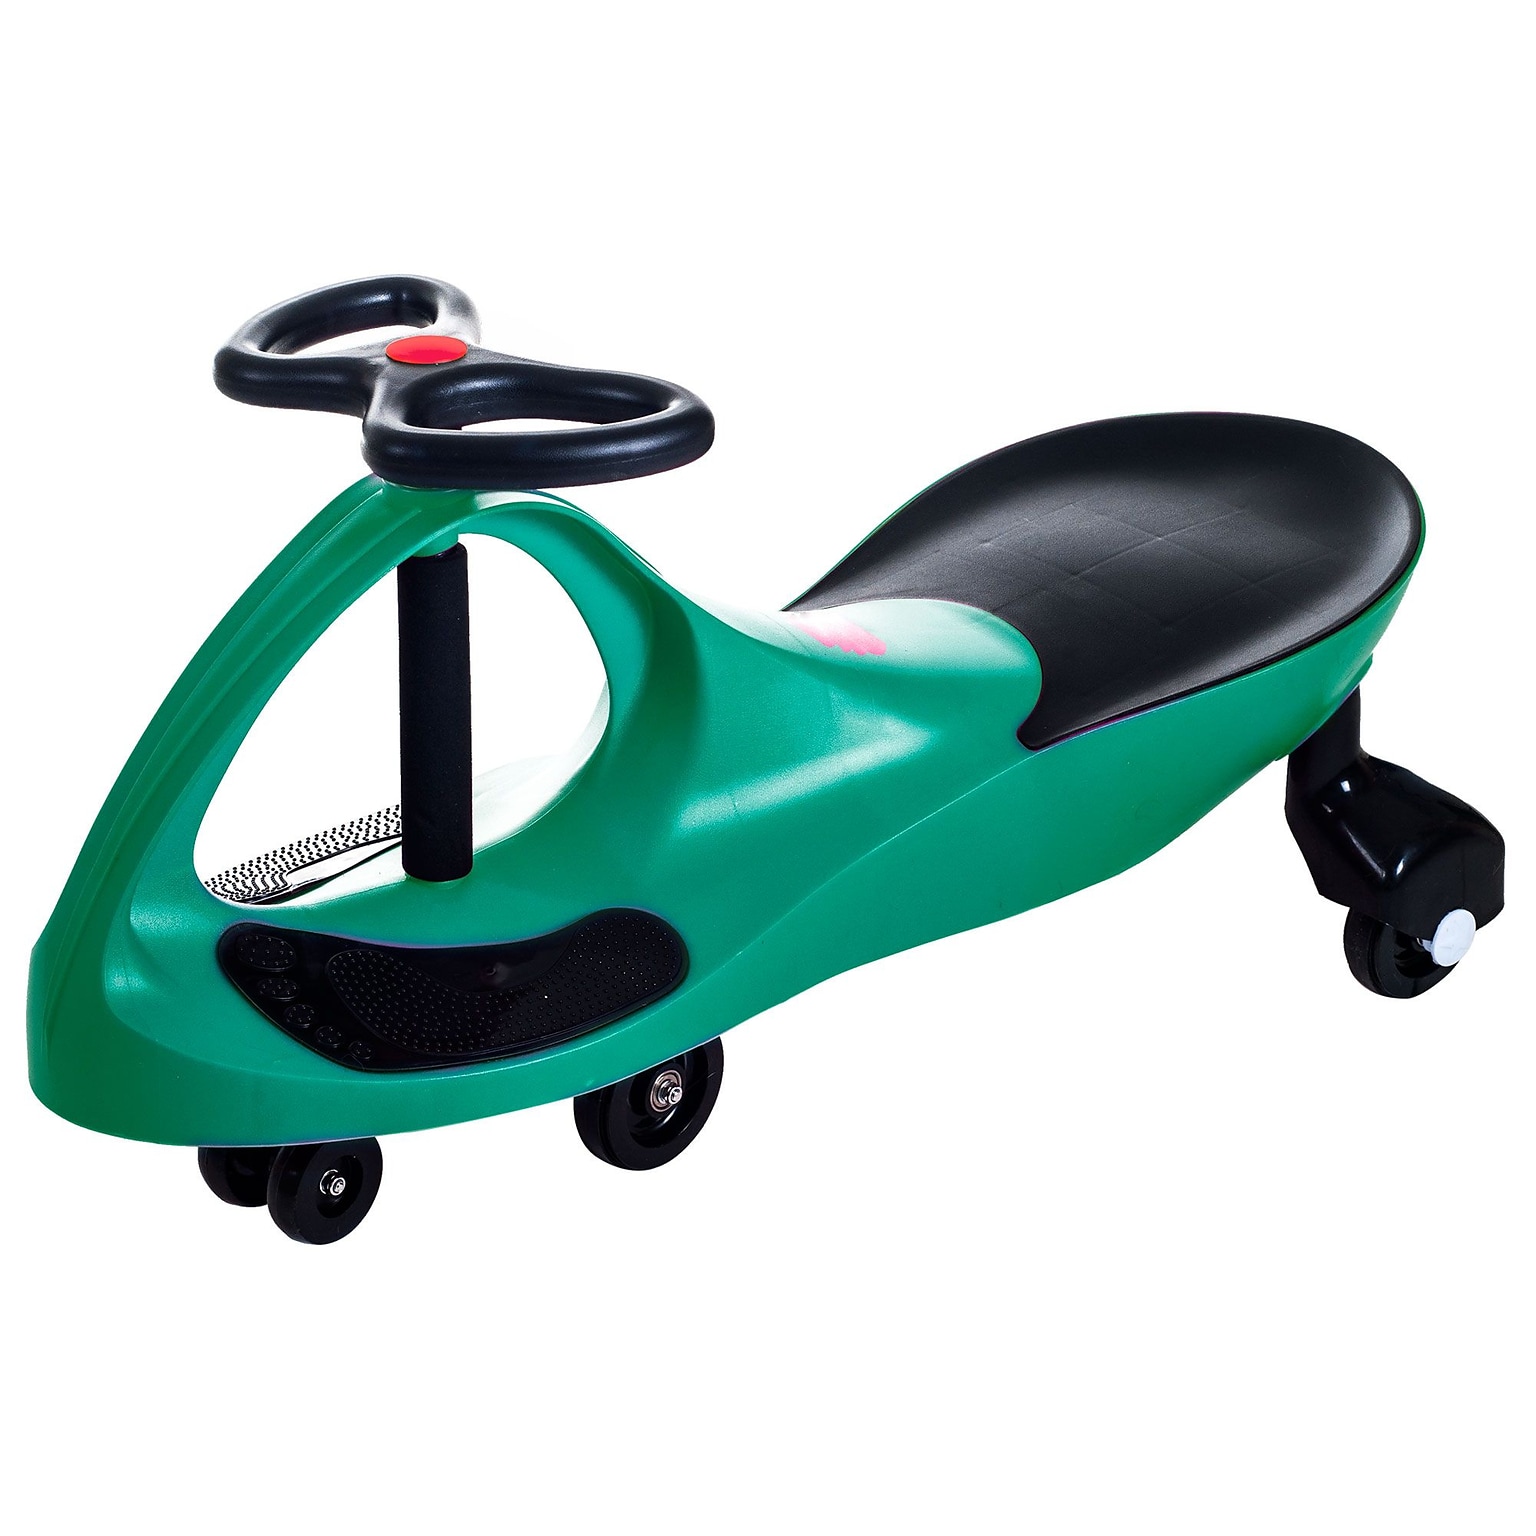 Lil Rider Green Wiggle Ride-on Car, Green (886511397804)